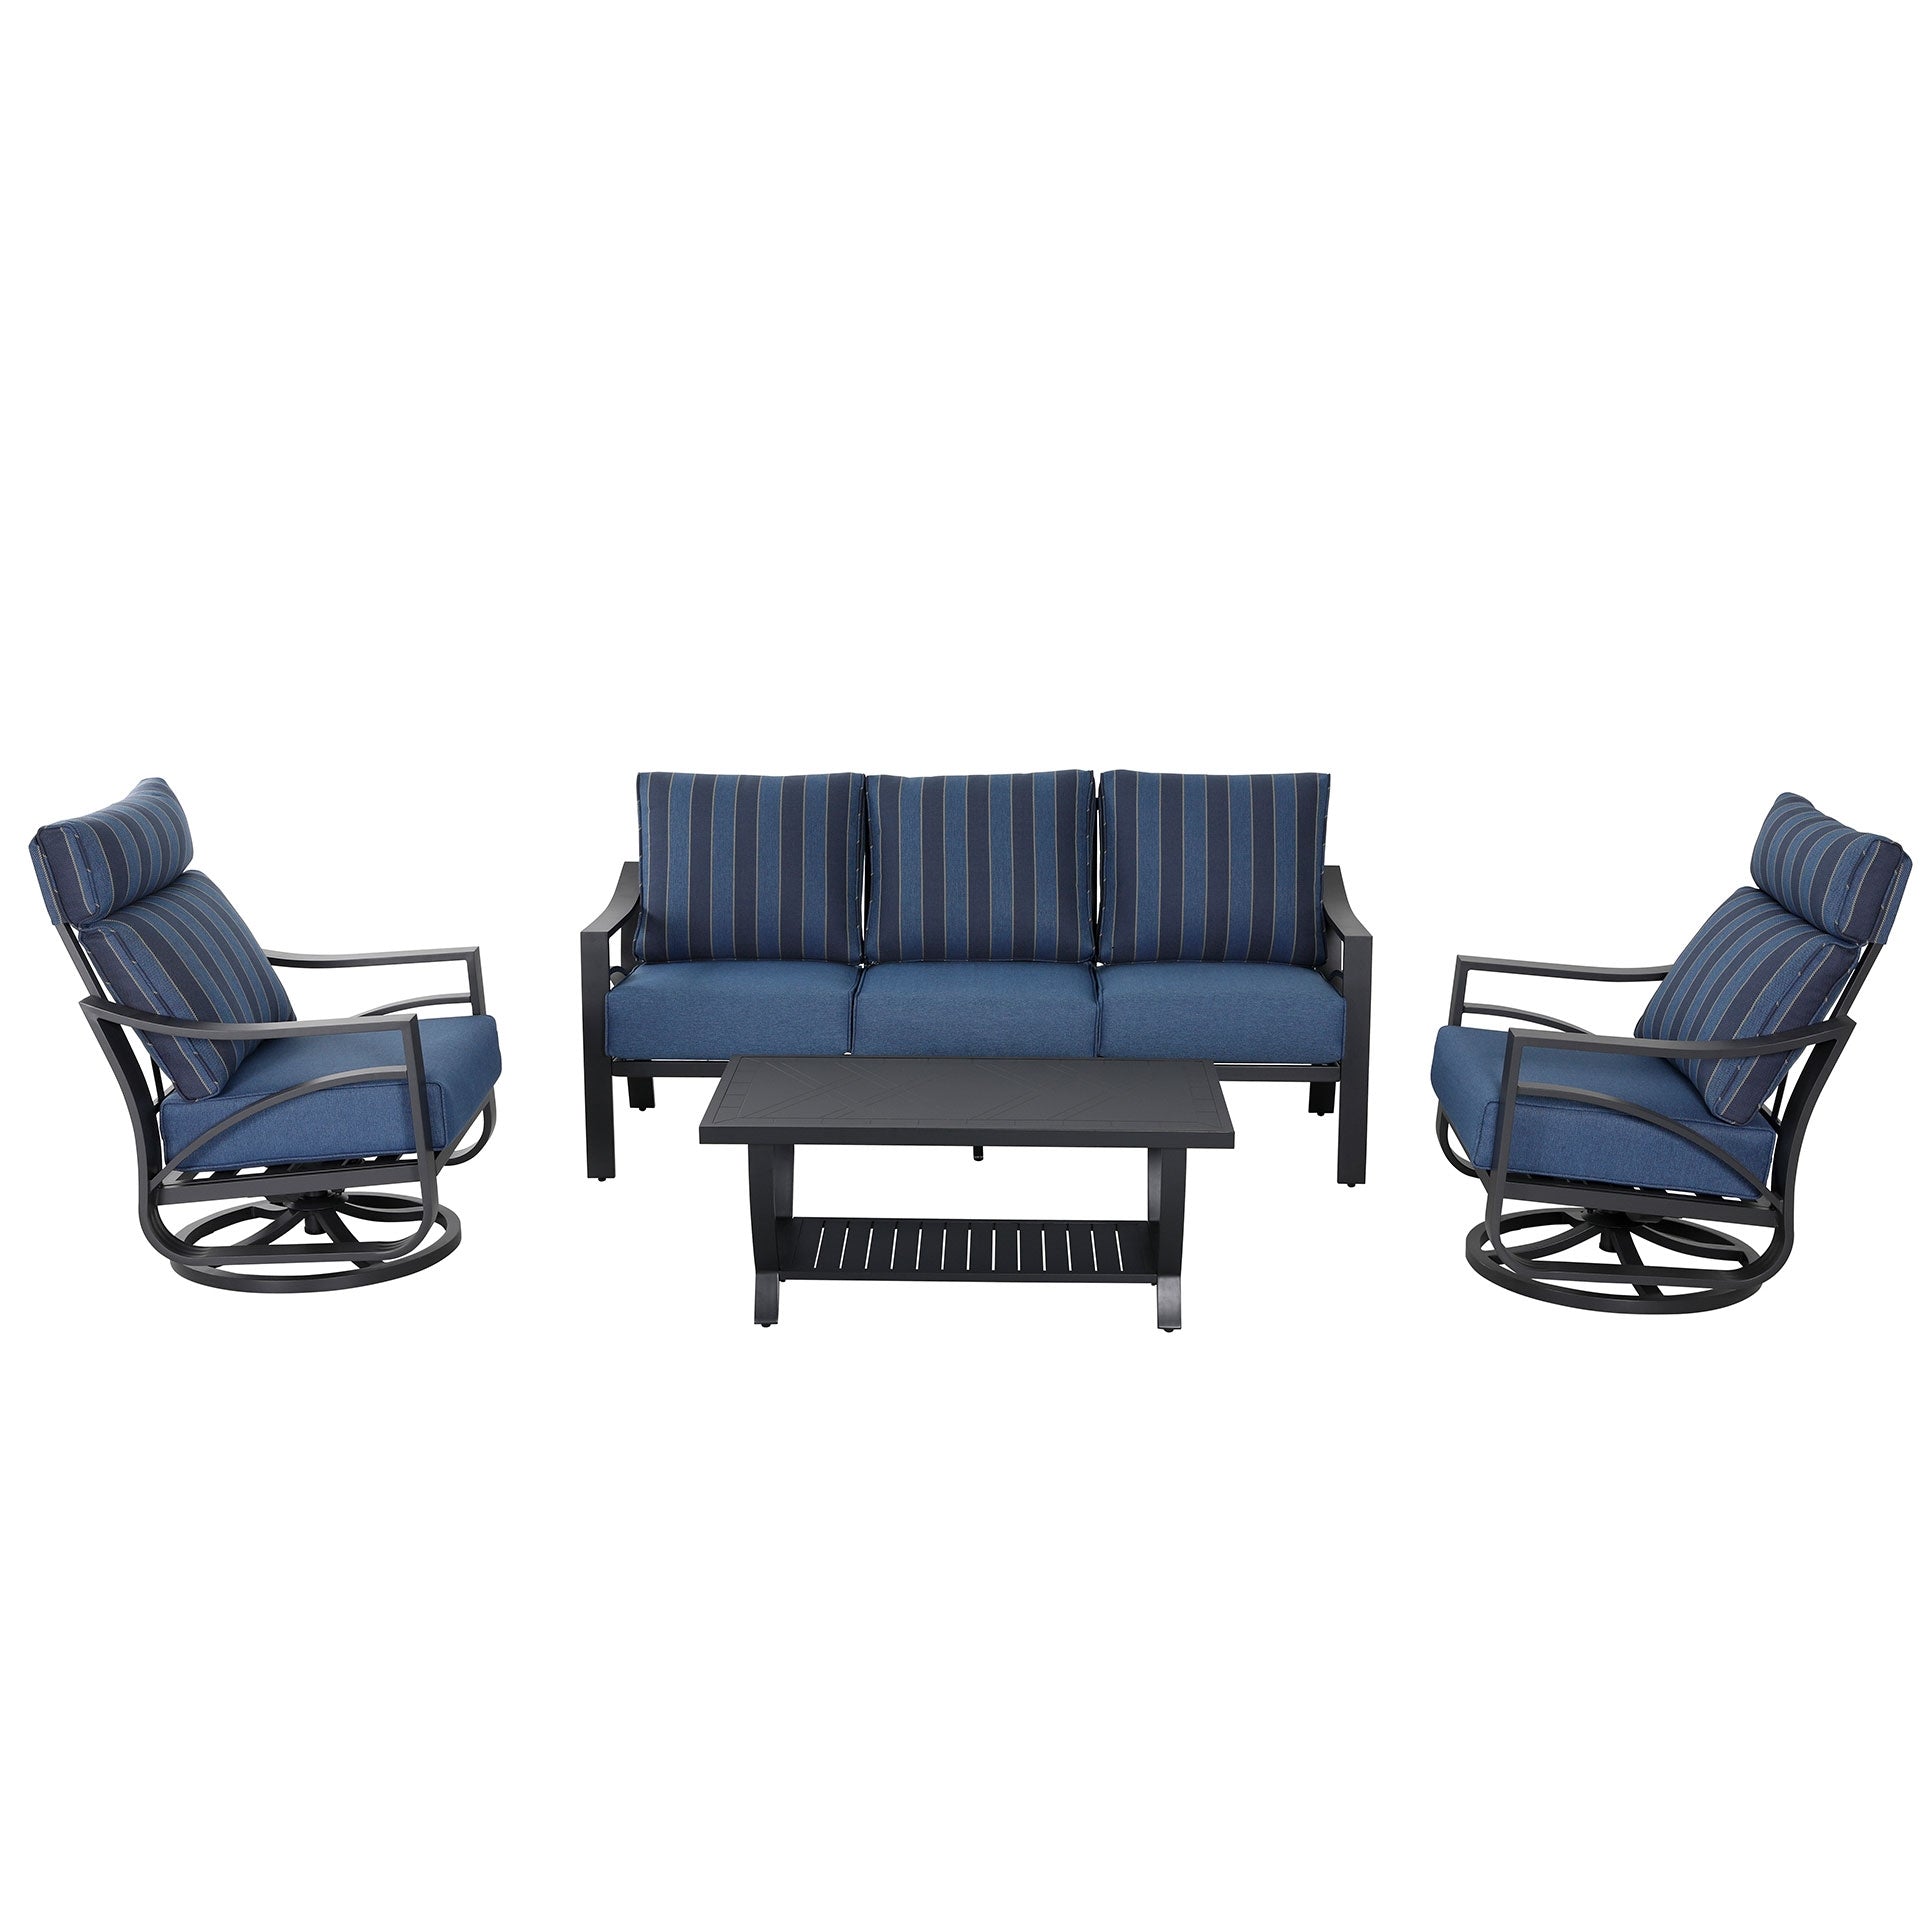 Patio Time Jarvis 4-Piece Aluminum Sofa Set with Swivel Rocking Chairs